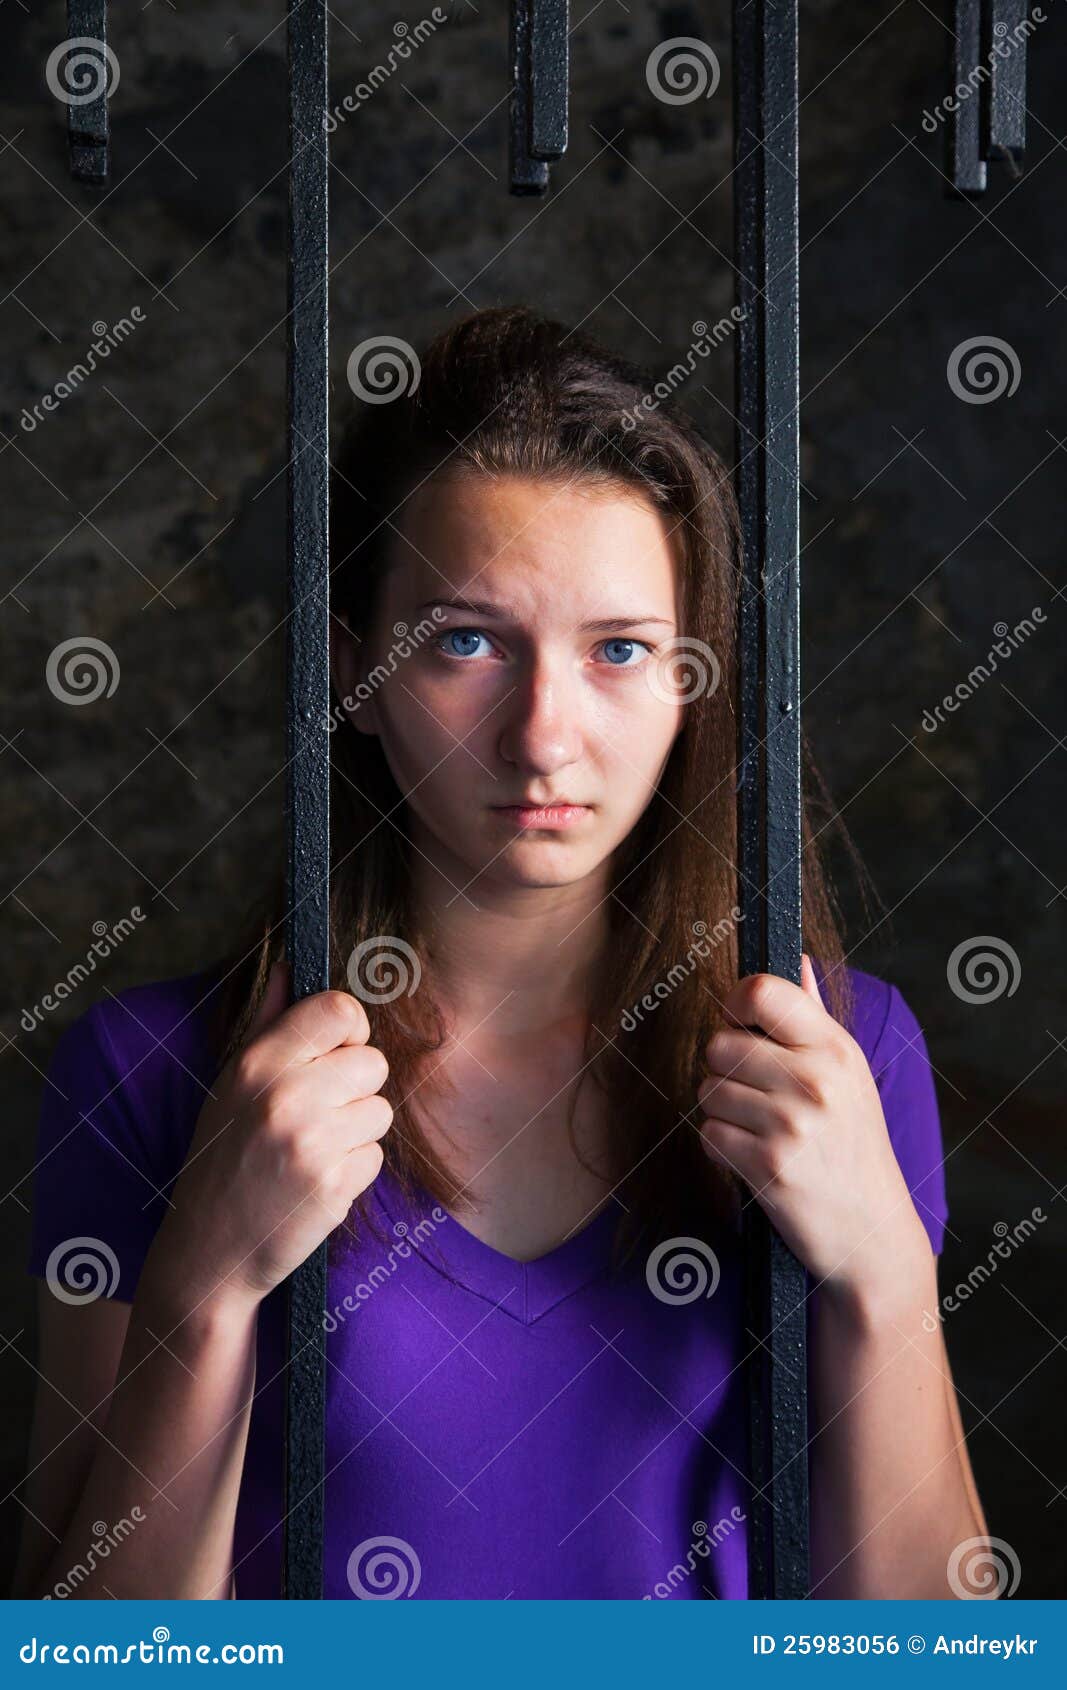 Young Woman Behind The Bars Stock Photo Image of inmate, confined